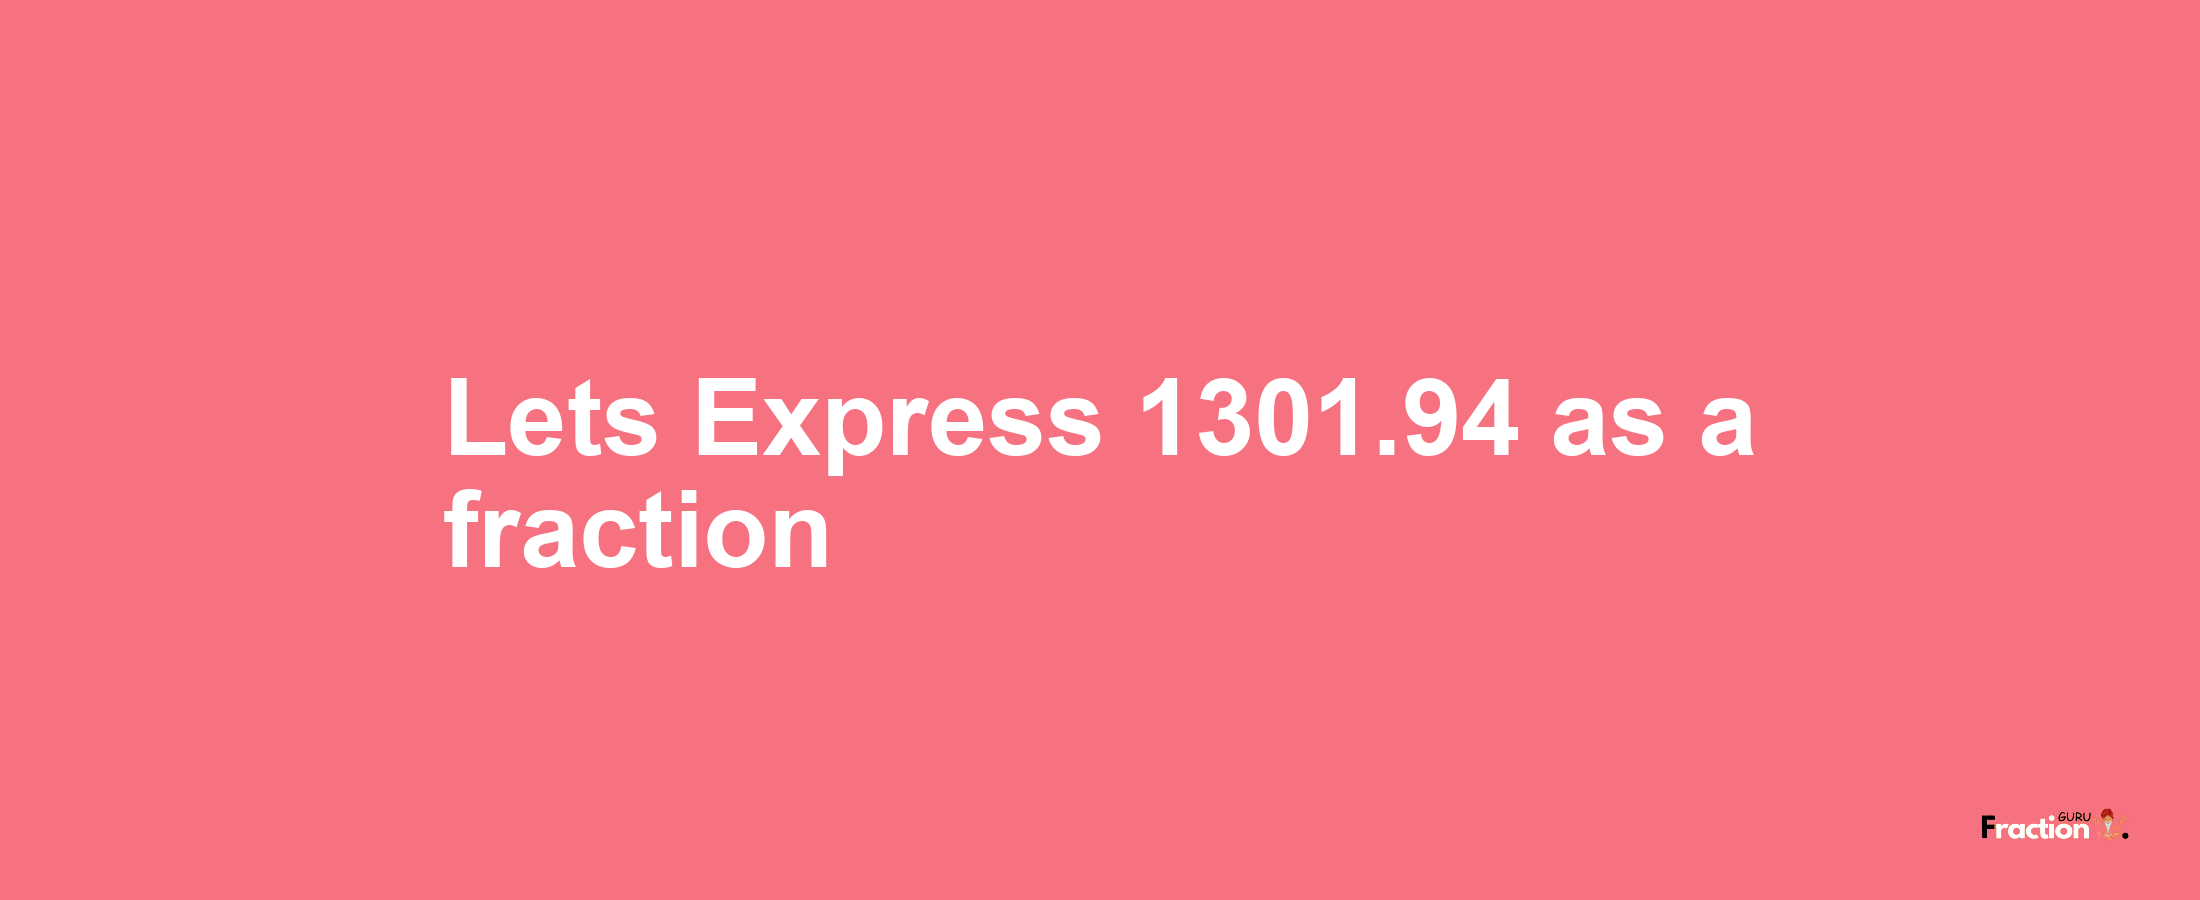 Lets Express 1301.94 as afraction